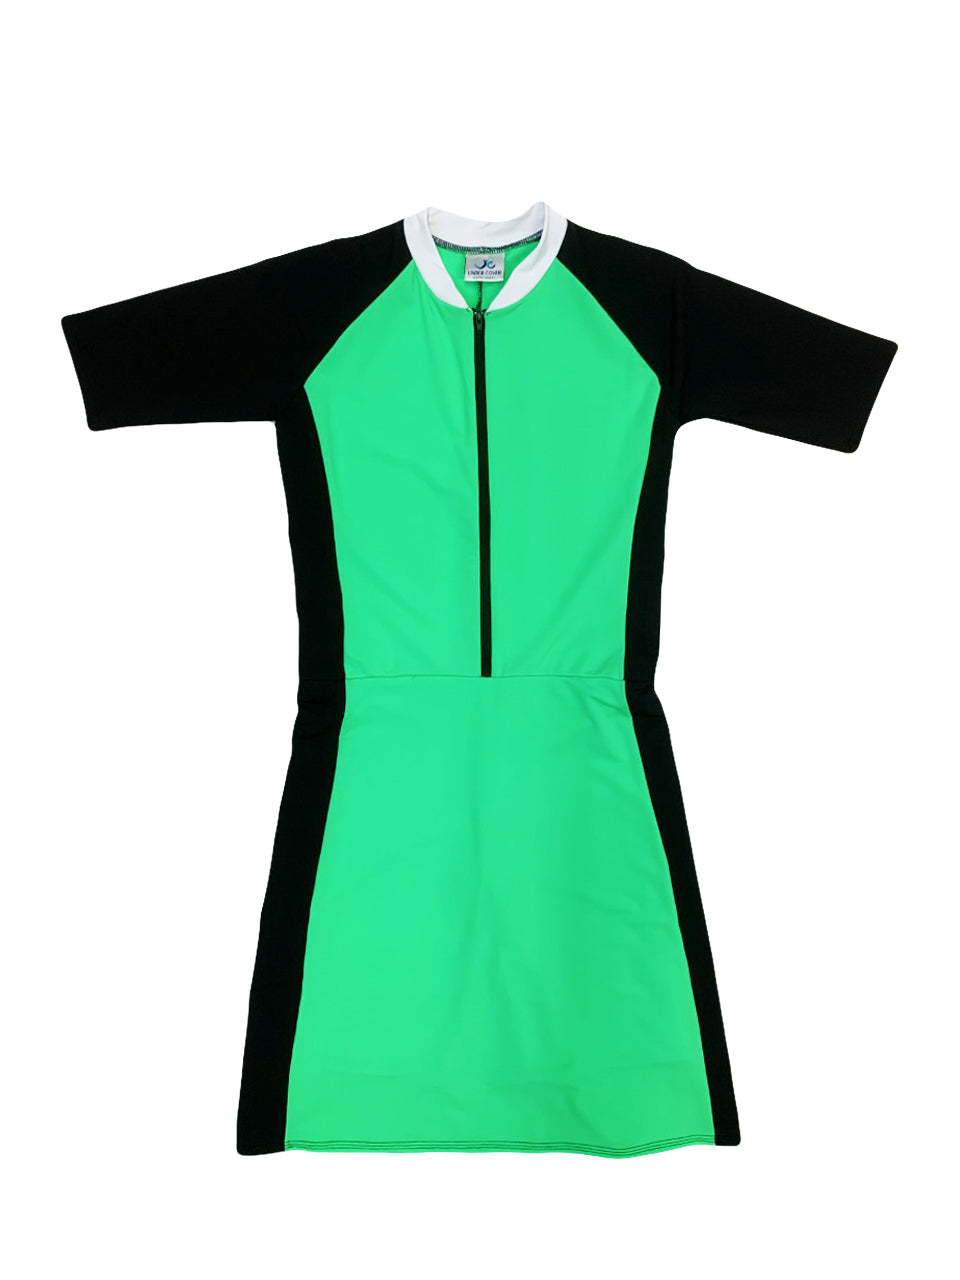 Black and Green SURFsuit